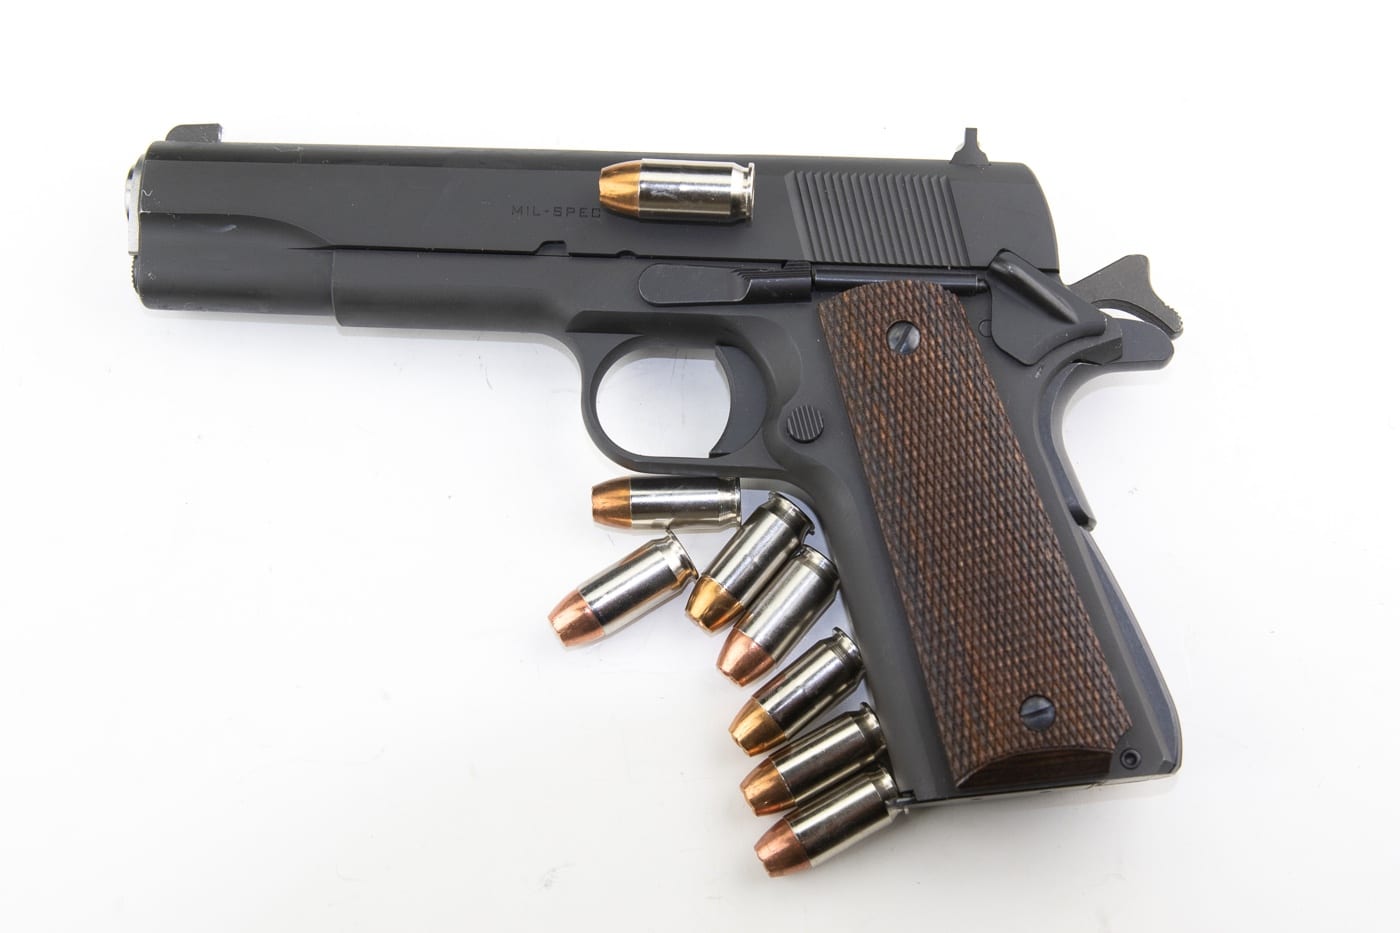 In this image, the author placed .45 ACP ammunition around the gun to represent carry in condition 1. The author recommends the use of the 1911 pistol in this mode with one in the chamber and the hammer cocked with the safety on. The manual safety is deactivated when the pistol is drawn.